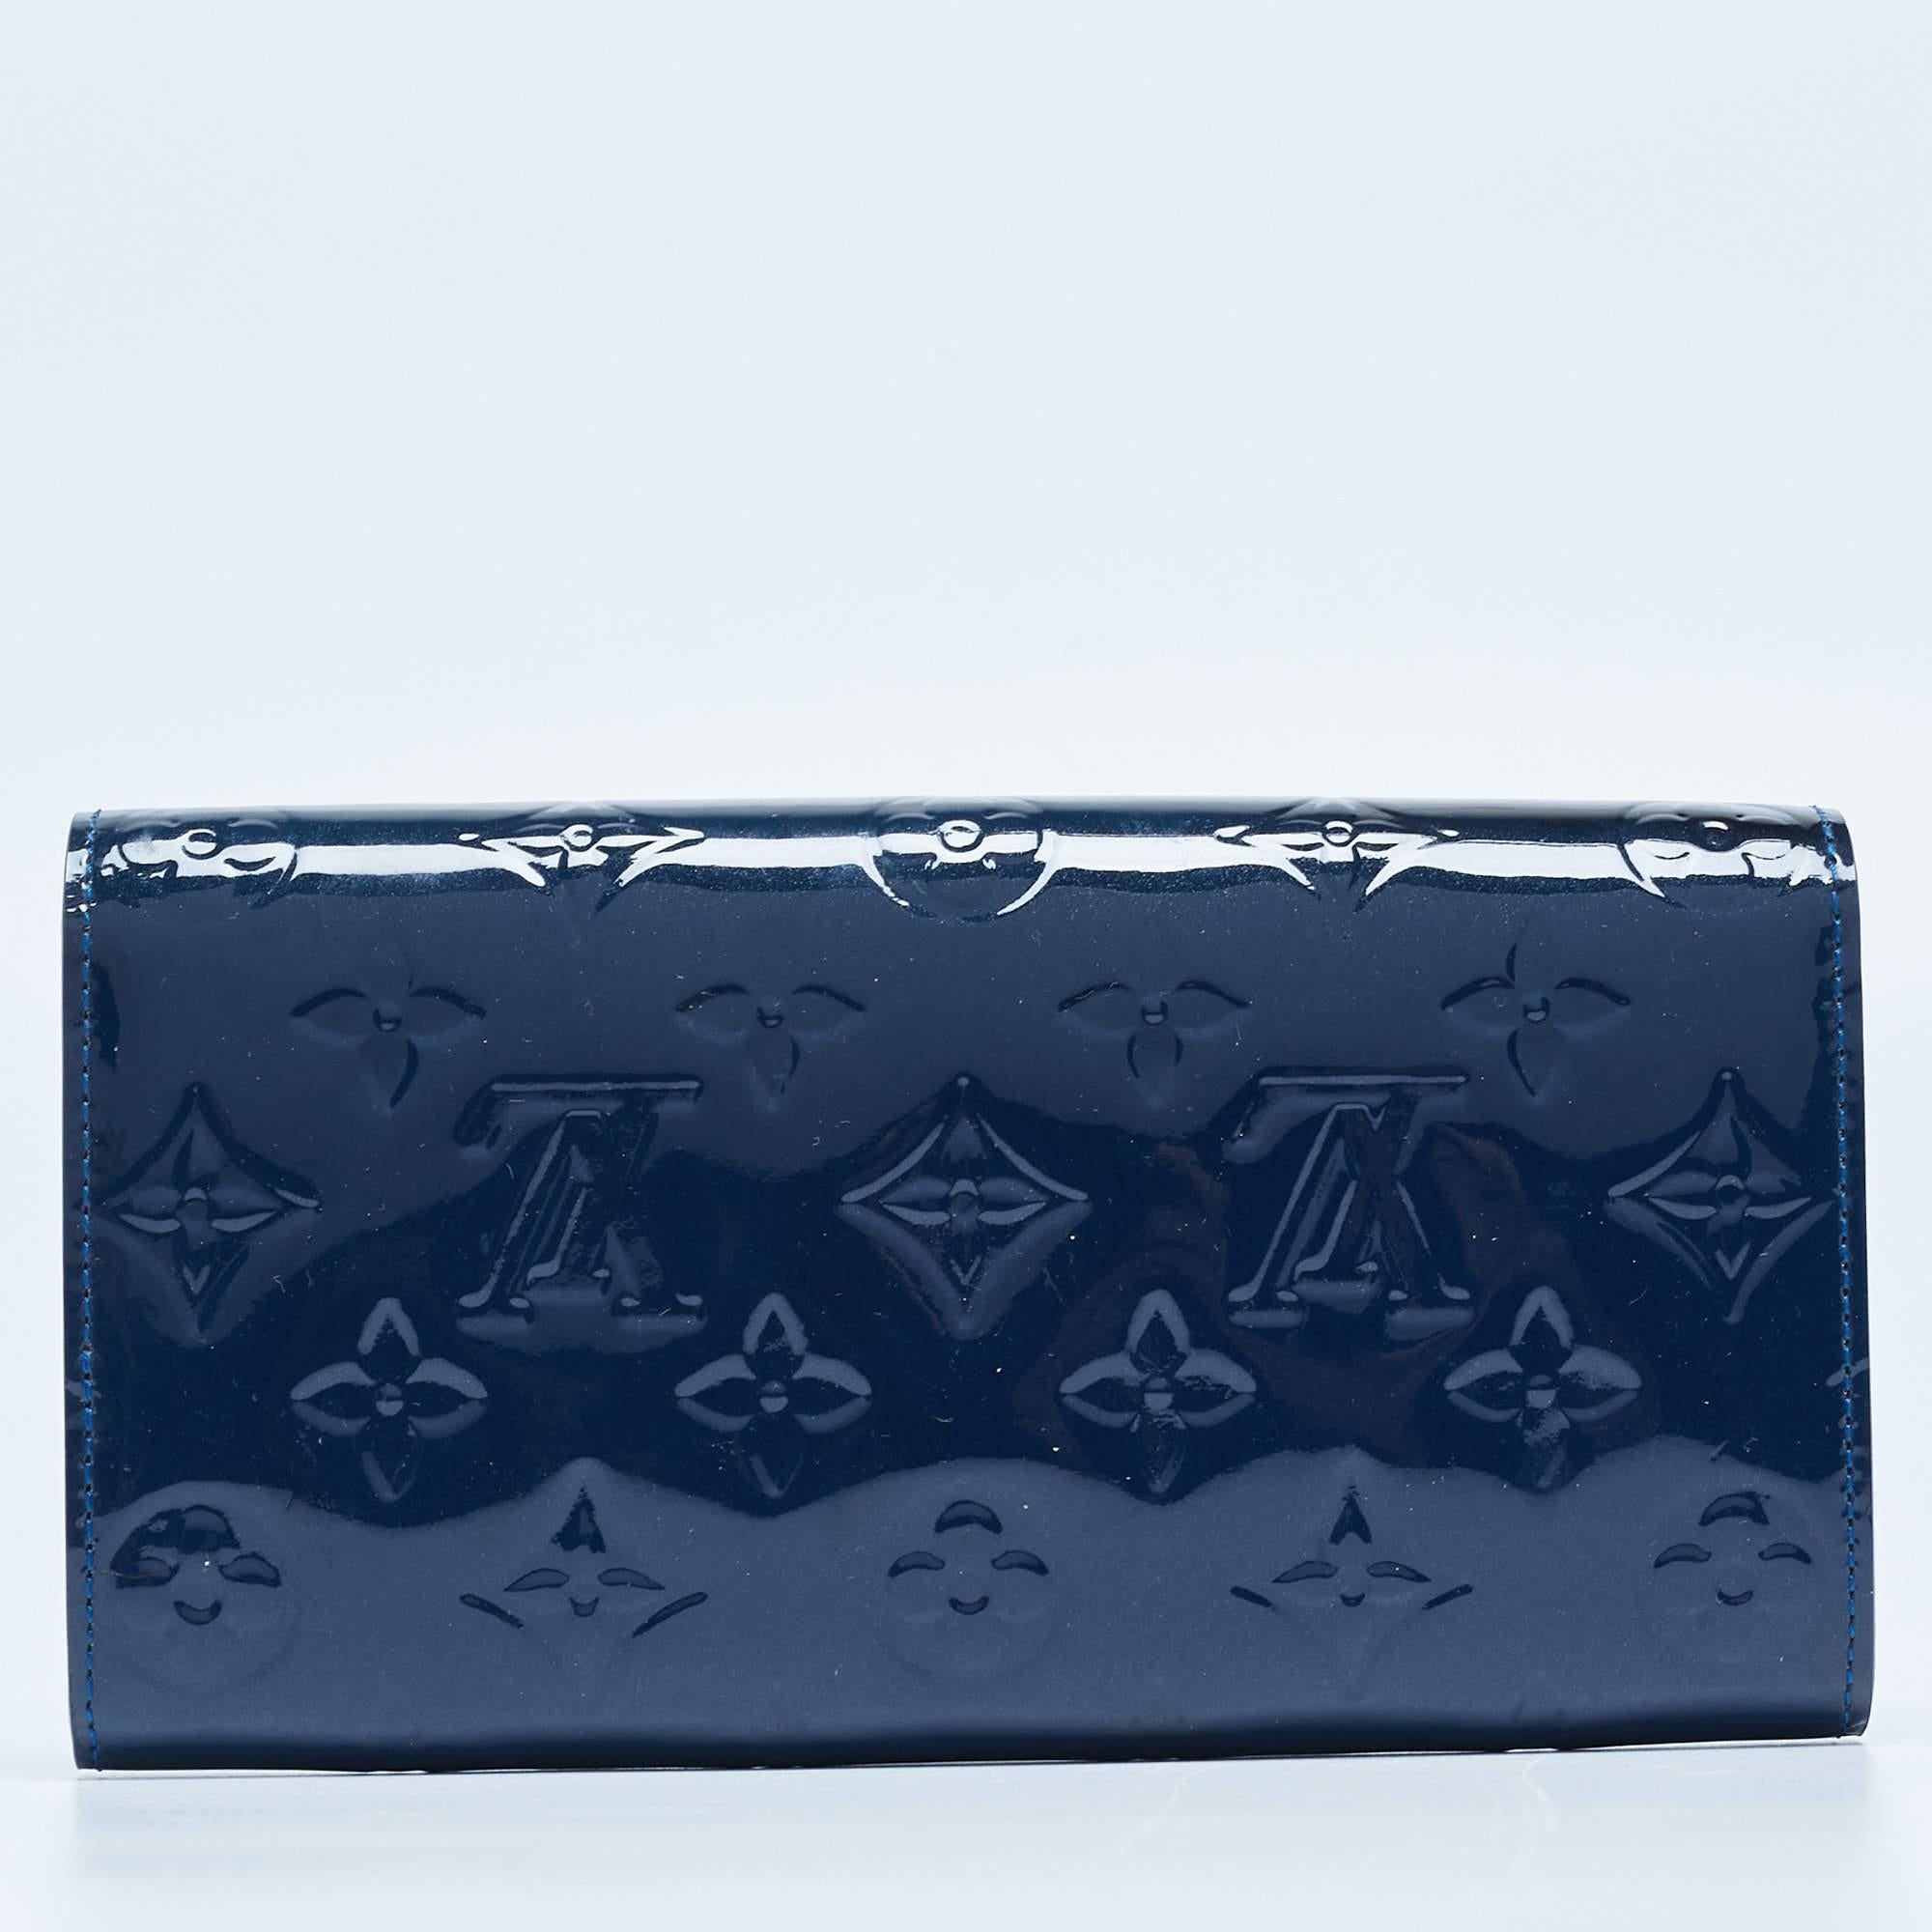 This LV blue wallet is conveniently designed for everyday use. It comes with a well-structured interior for you to neatly arrange your cards and cash.

Includes: Original Dustbag, Original Box, Info Booklet, Original Dust Cloth